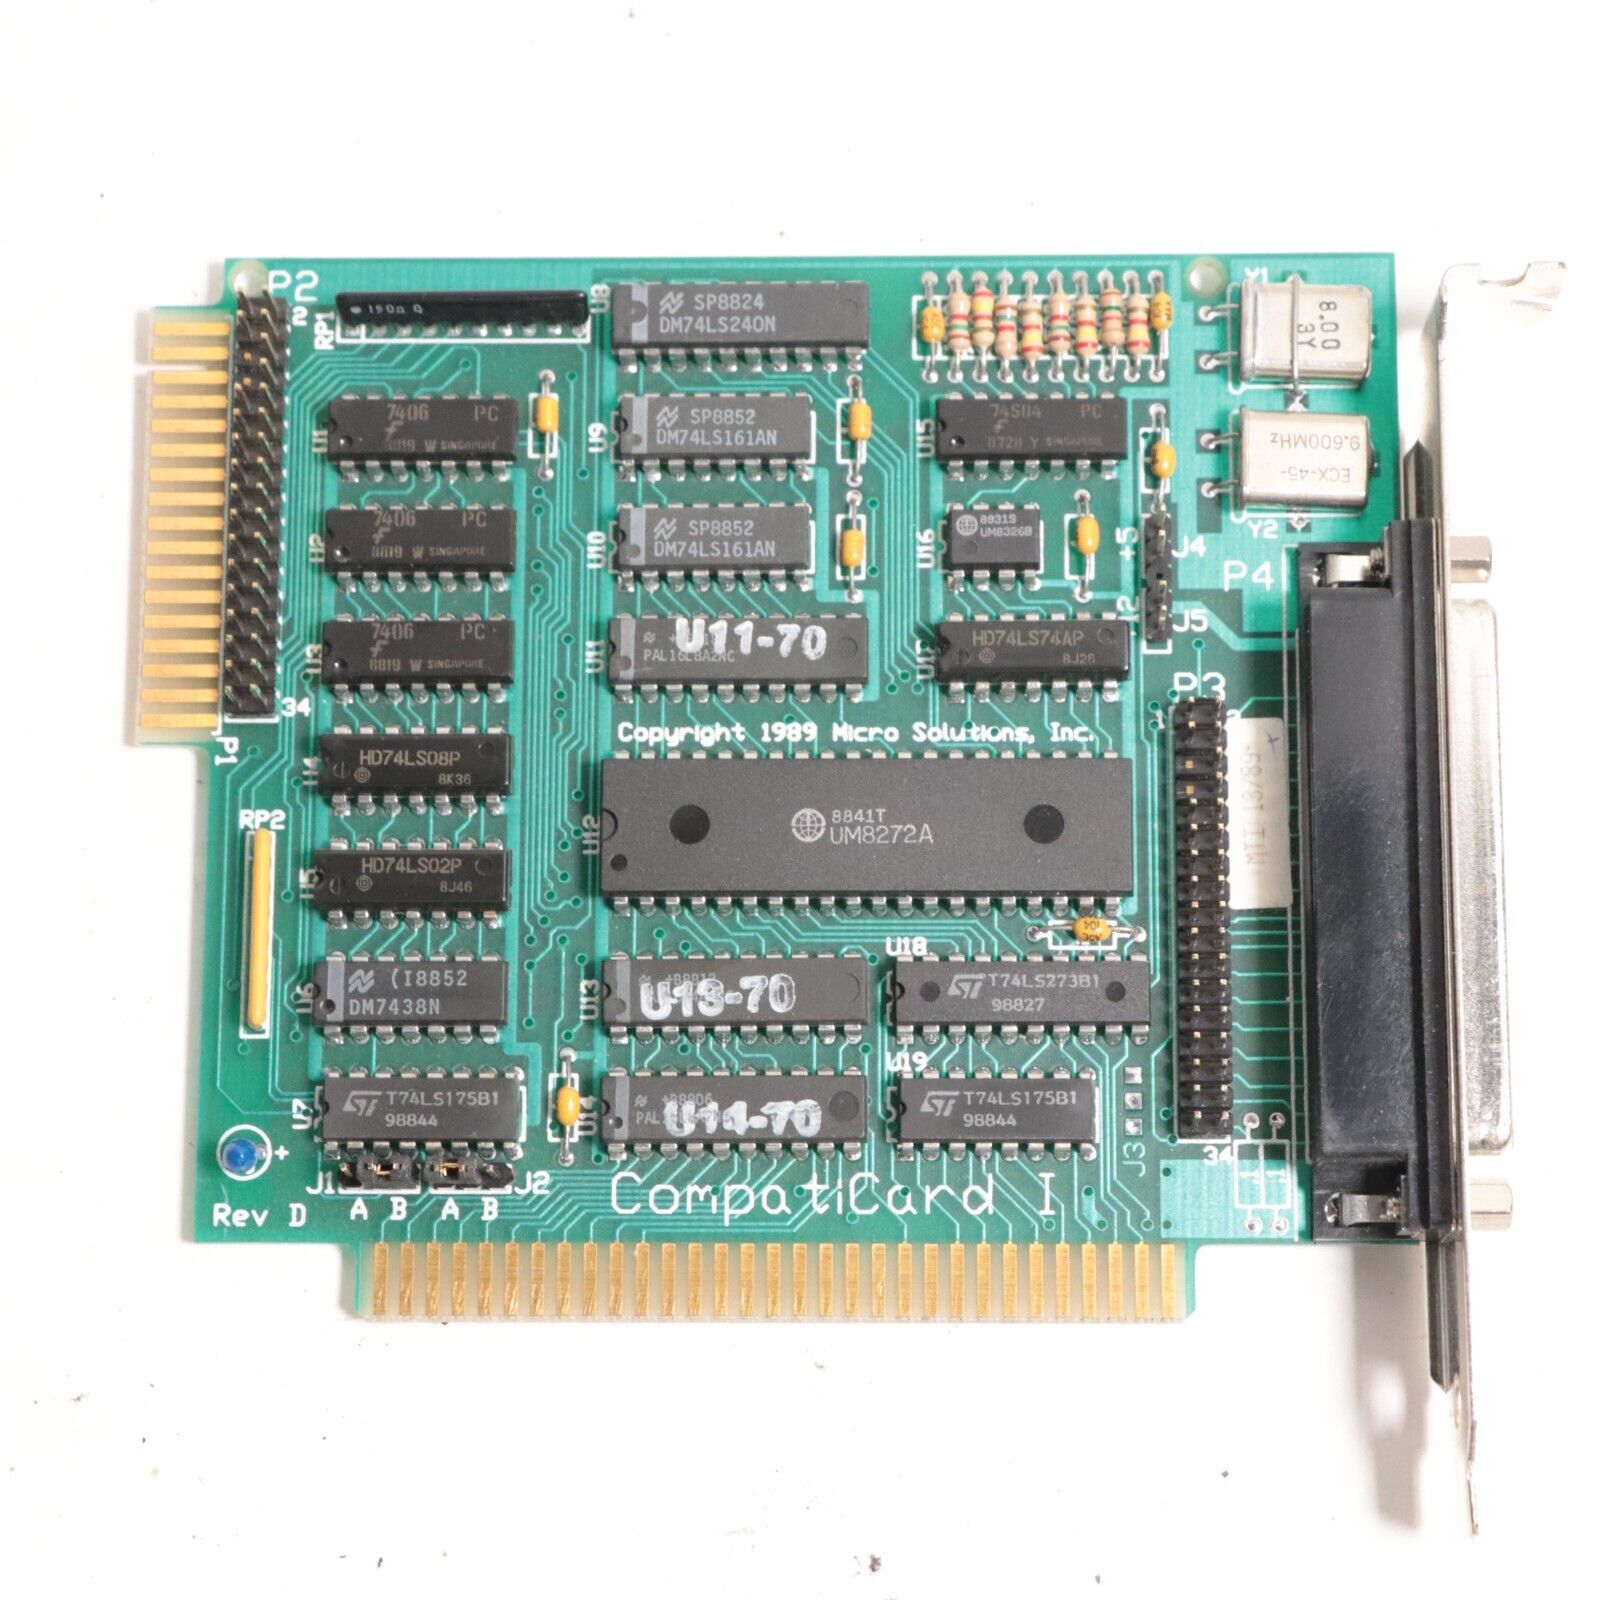 CompatiCard I PC XT AT 8-bit ISA Floppy Controller 1989 MicroSolutions